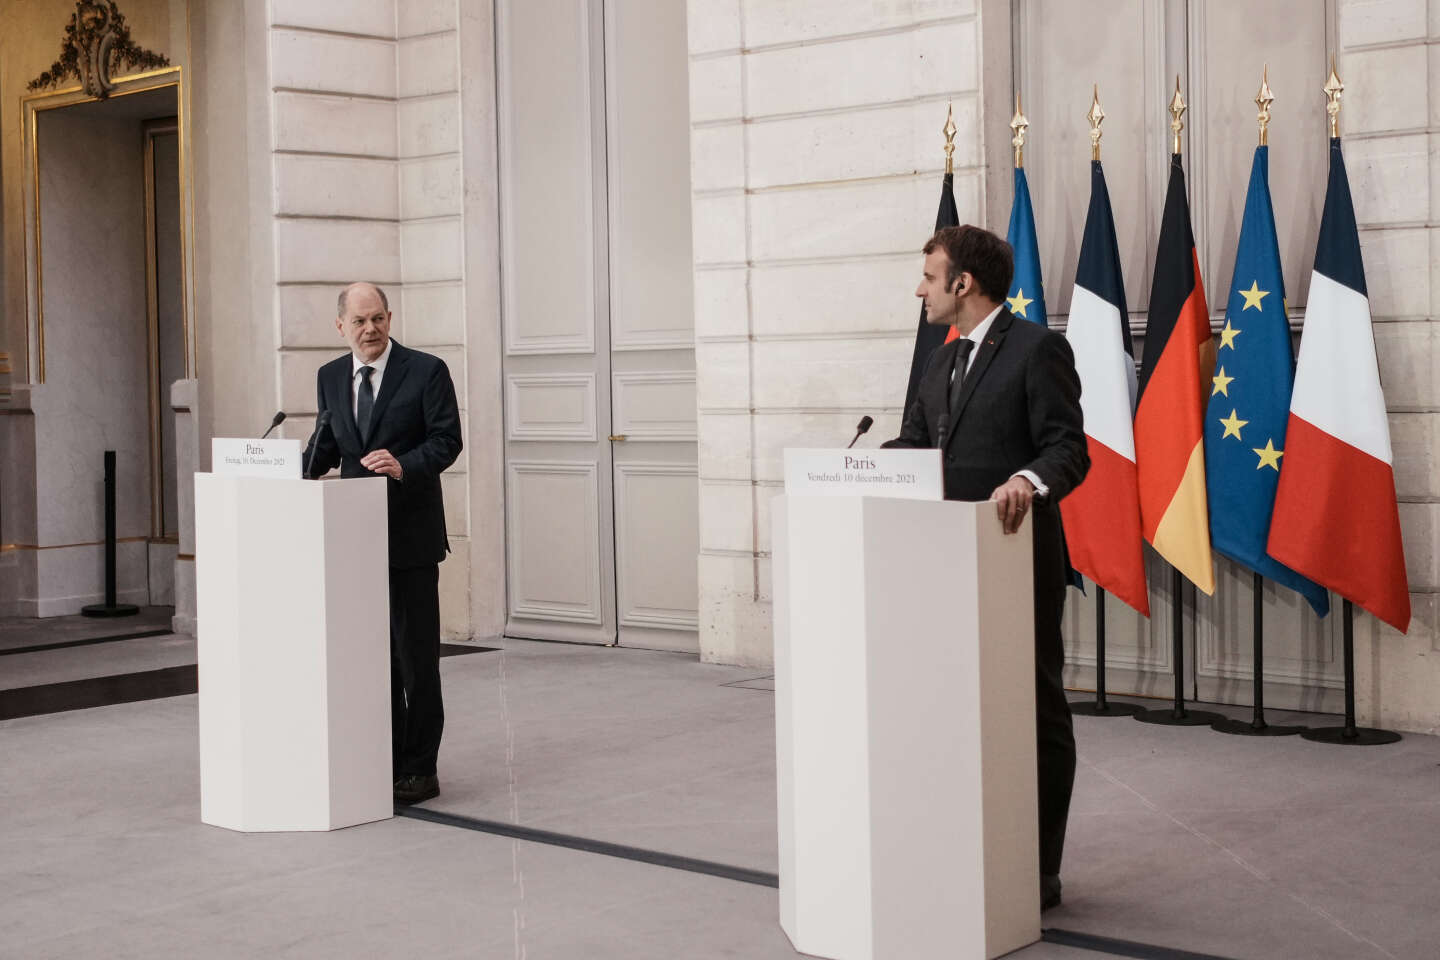 on nuclear power and the end of heat engines, disagreements persist between France and Germany